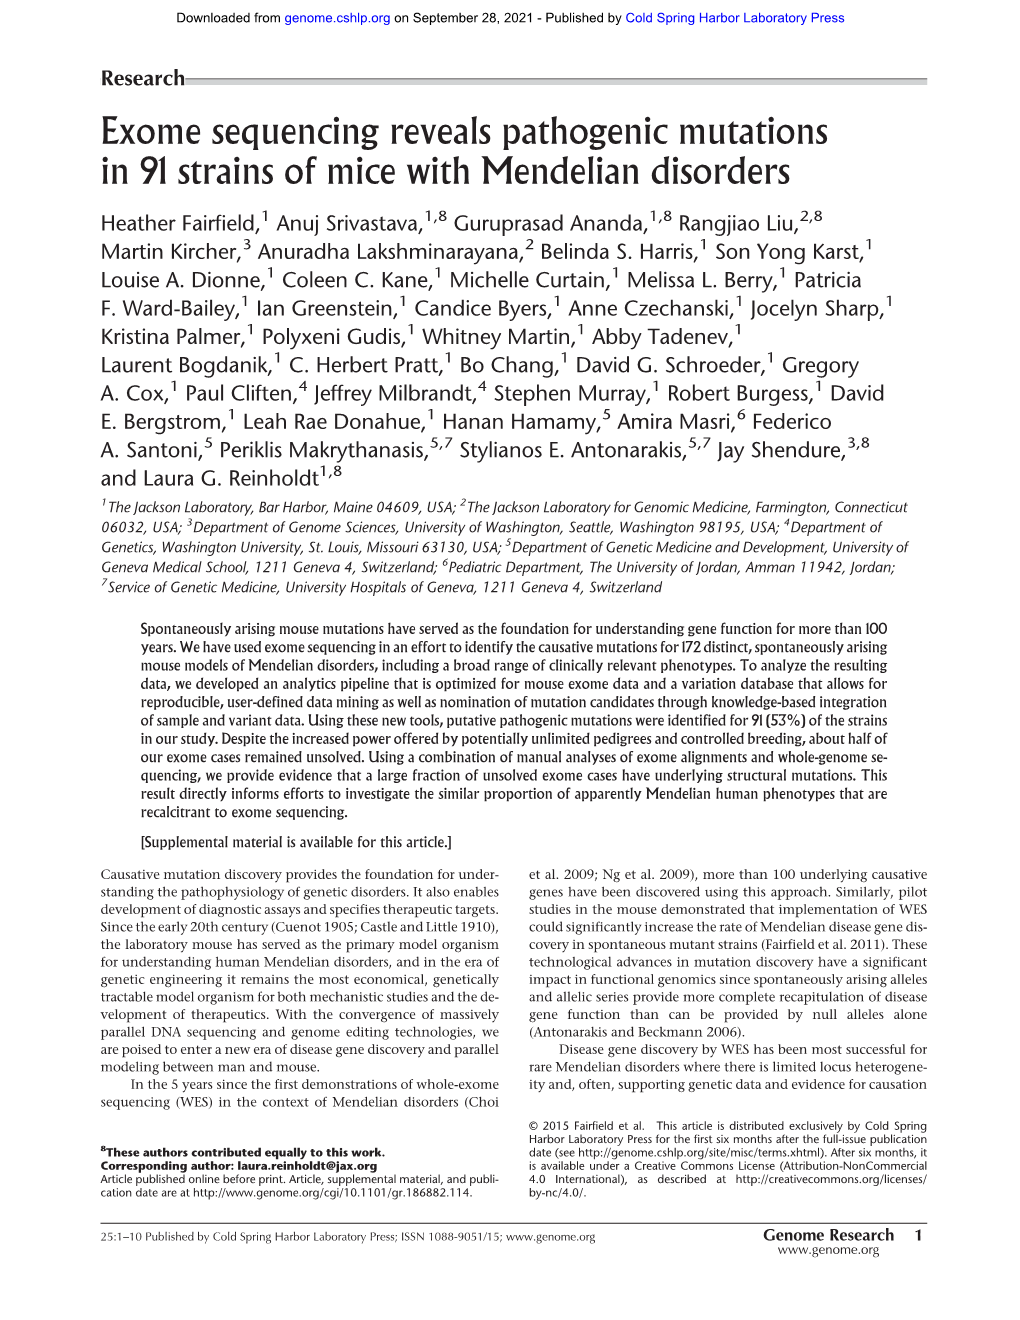 Exome Sequencing Reveals Pathogenic Mutations in 91 Strains of Mice with Mendelian Disorders